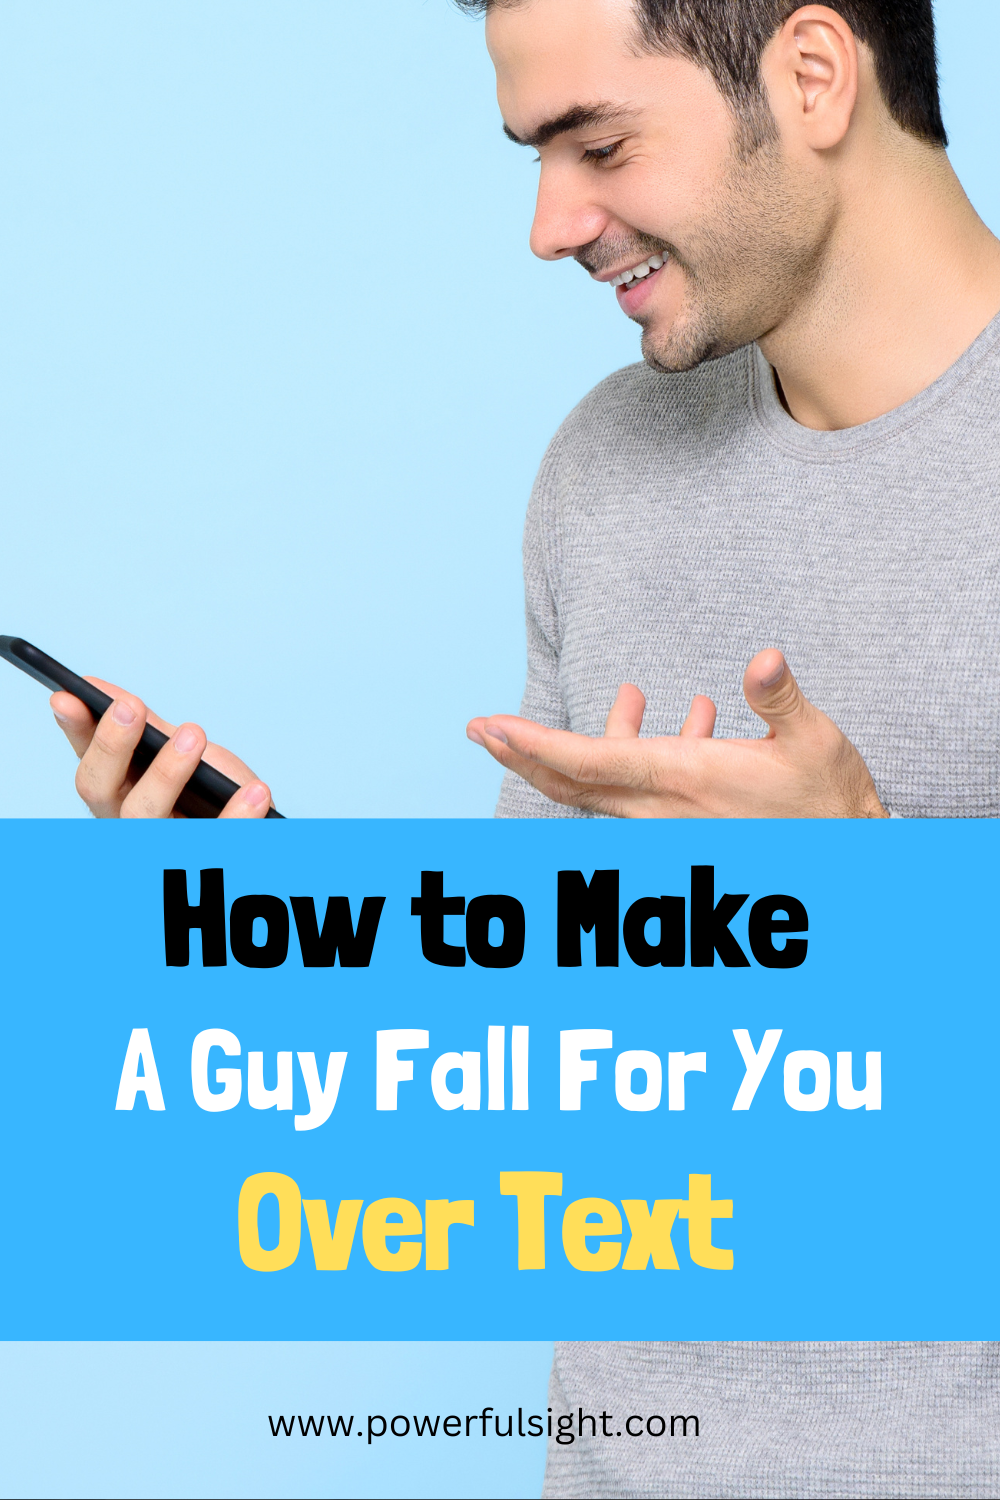 How to Make a Guy Fall for You Over Text